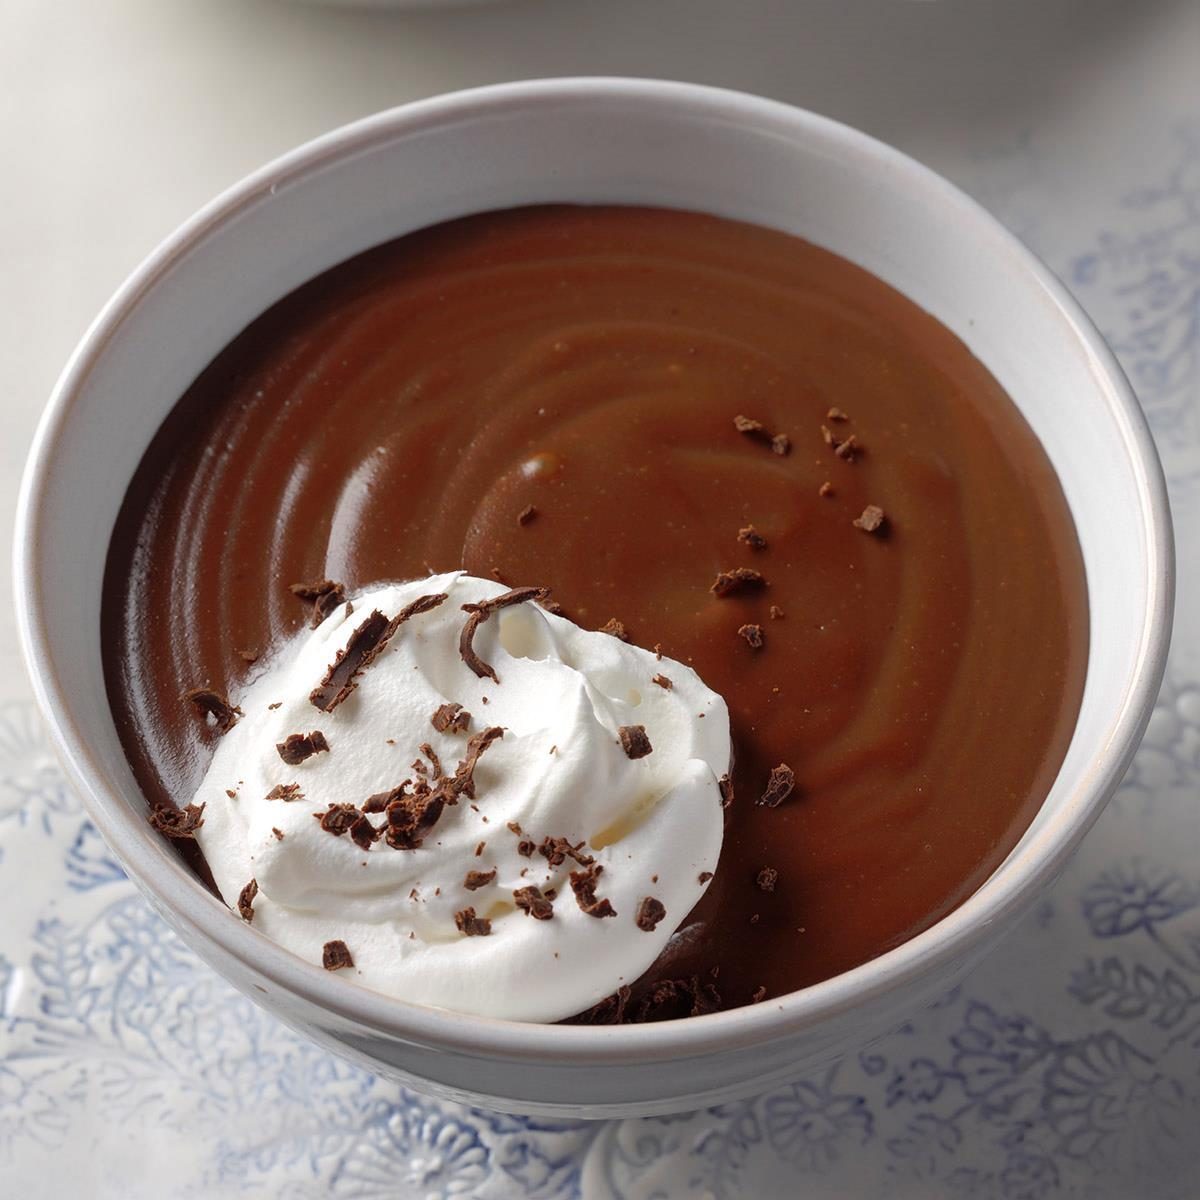 Old-Fashioned Chocolate Pudding Recipe | Taste of Home